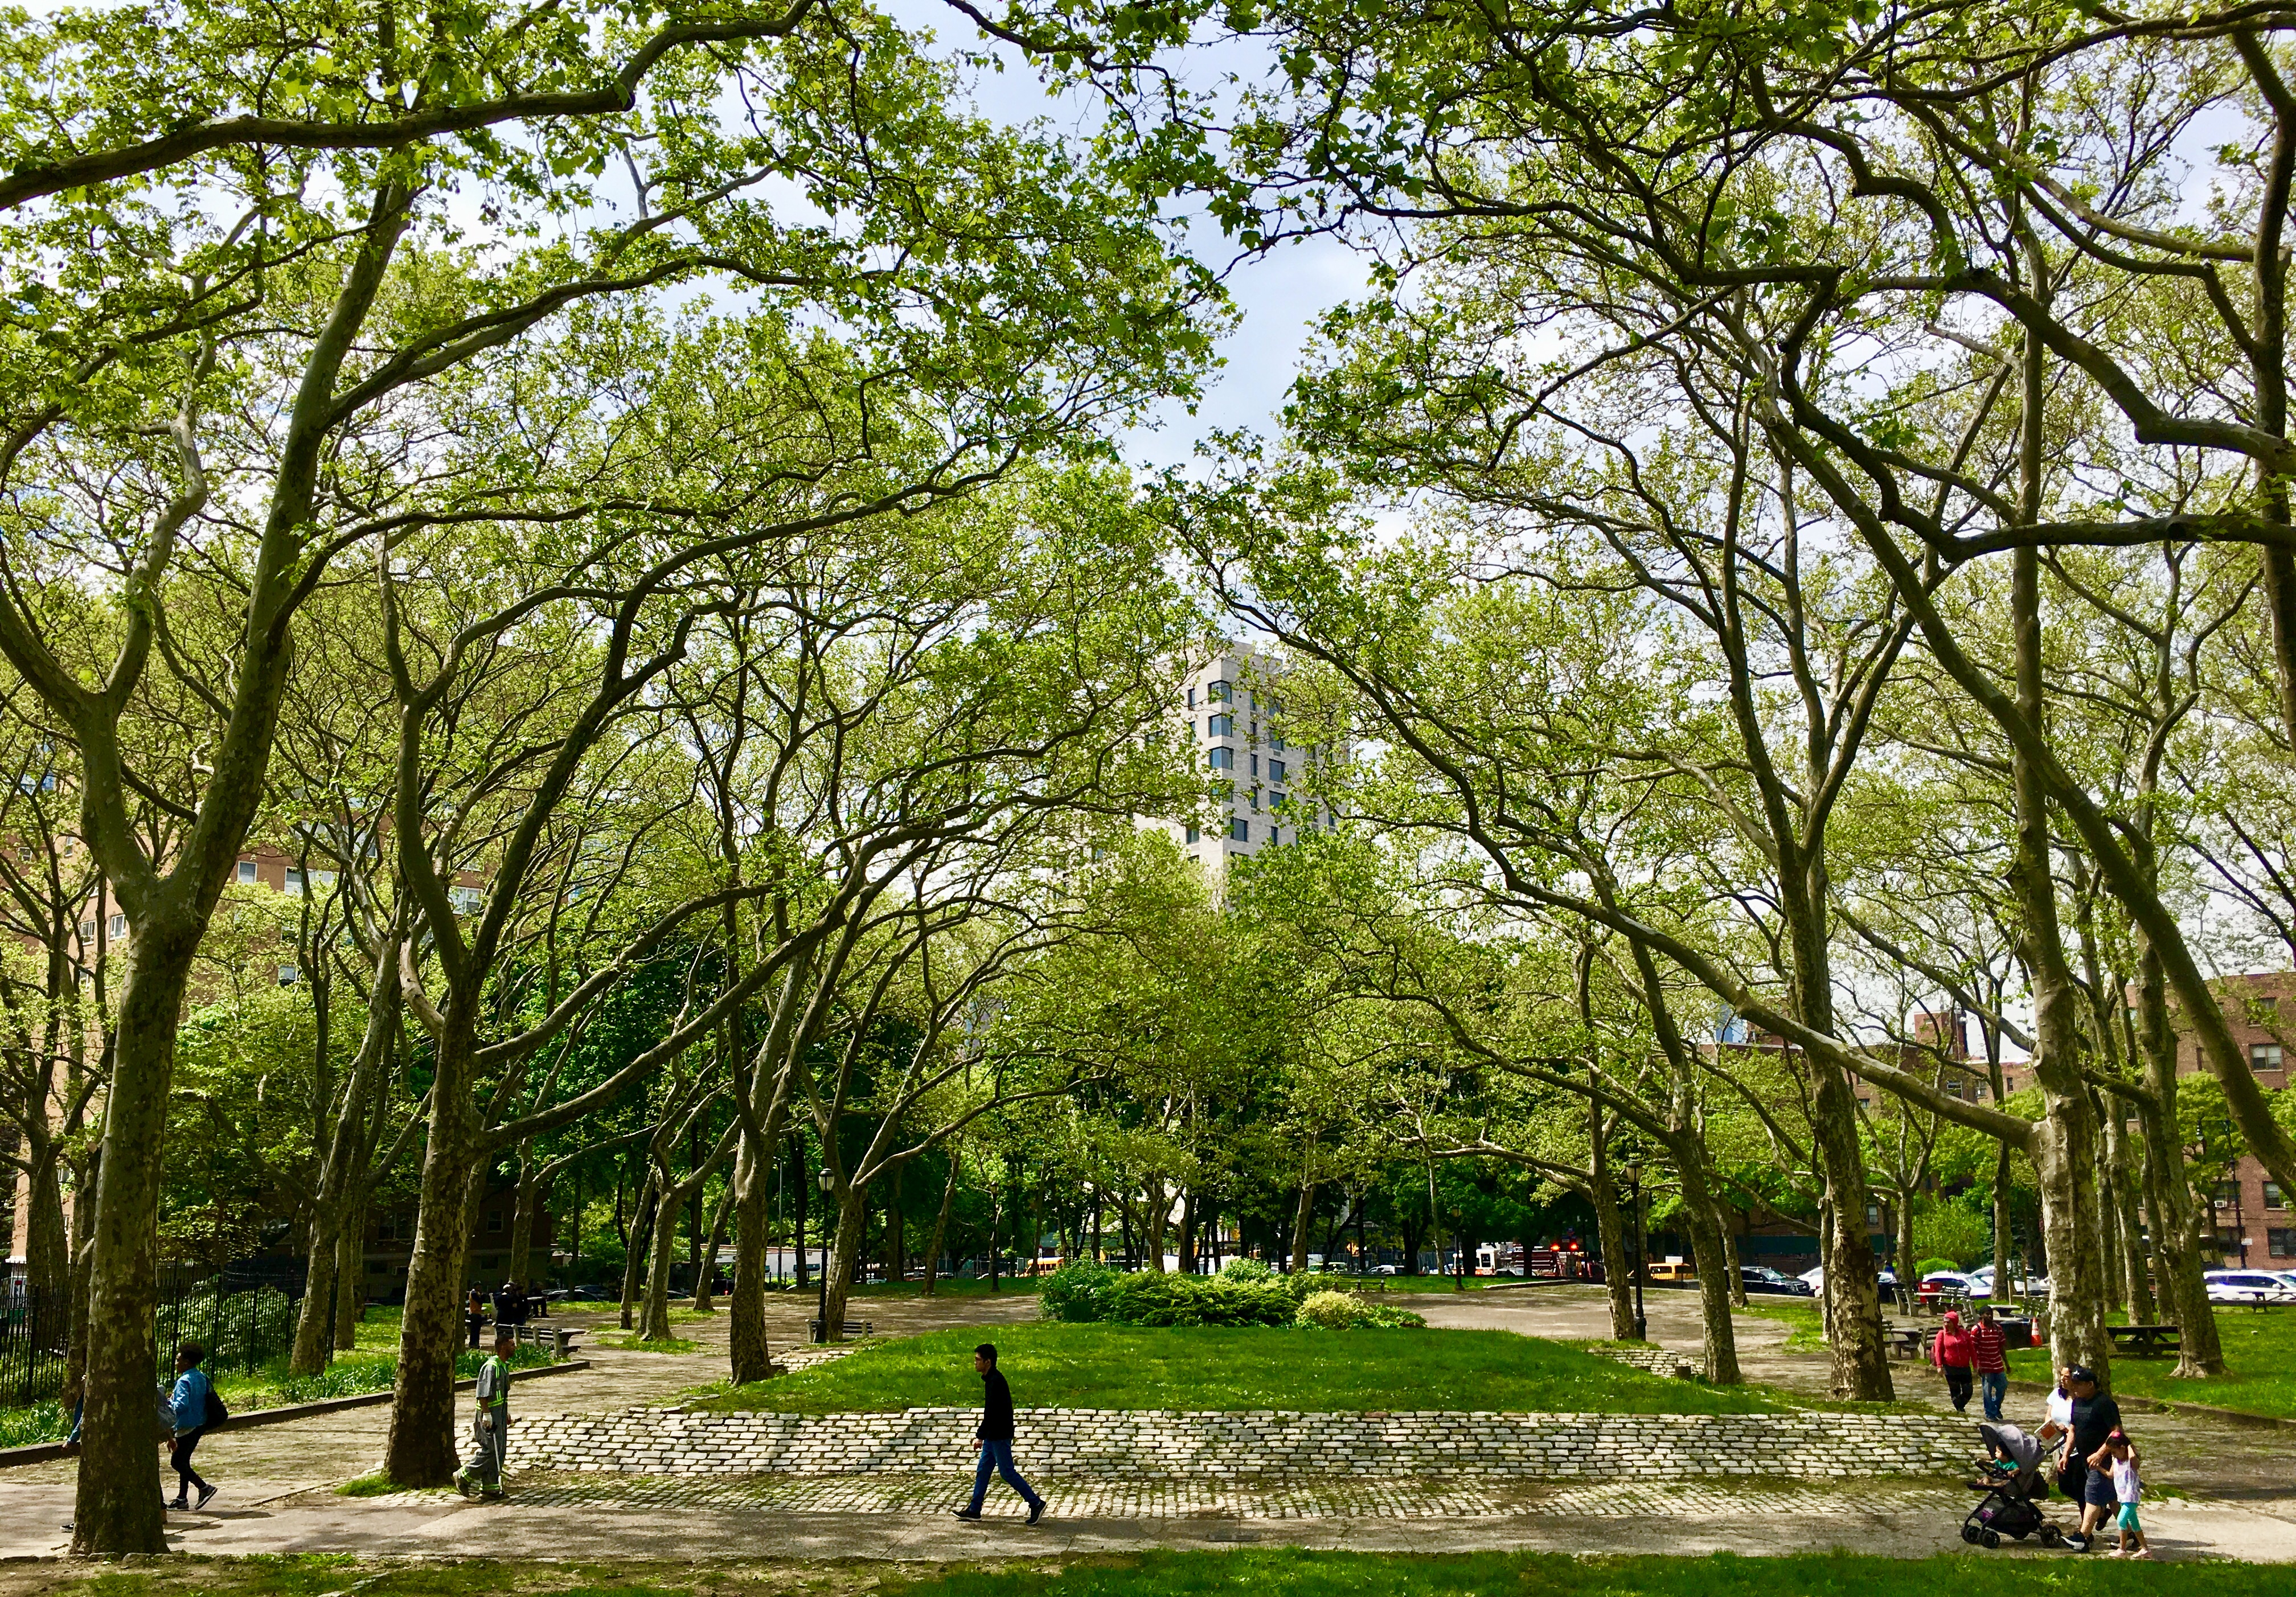 The tower seen through Fort Greene Park’s trees is 112 St. Edwards St. Eagle photo by Lore Croghan